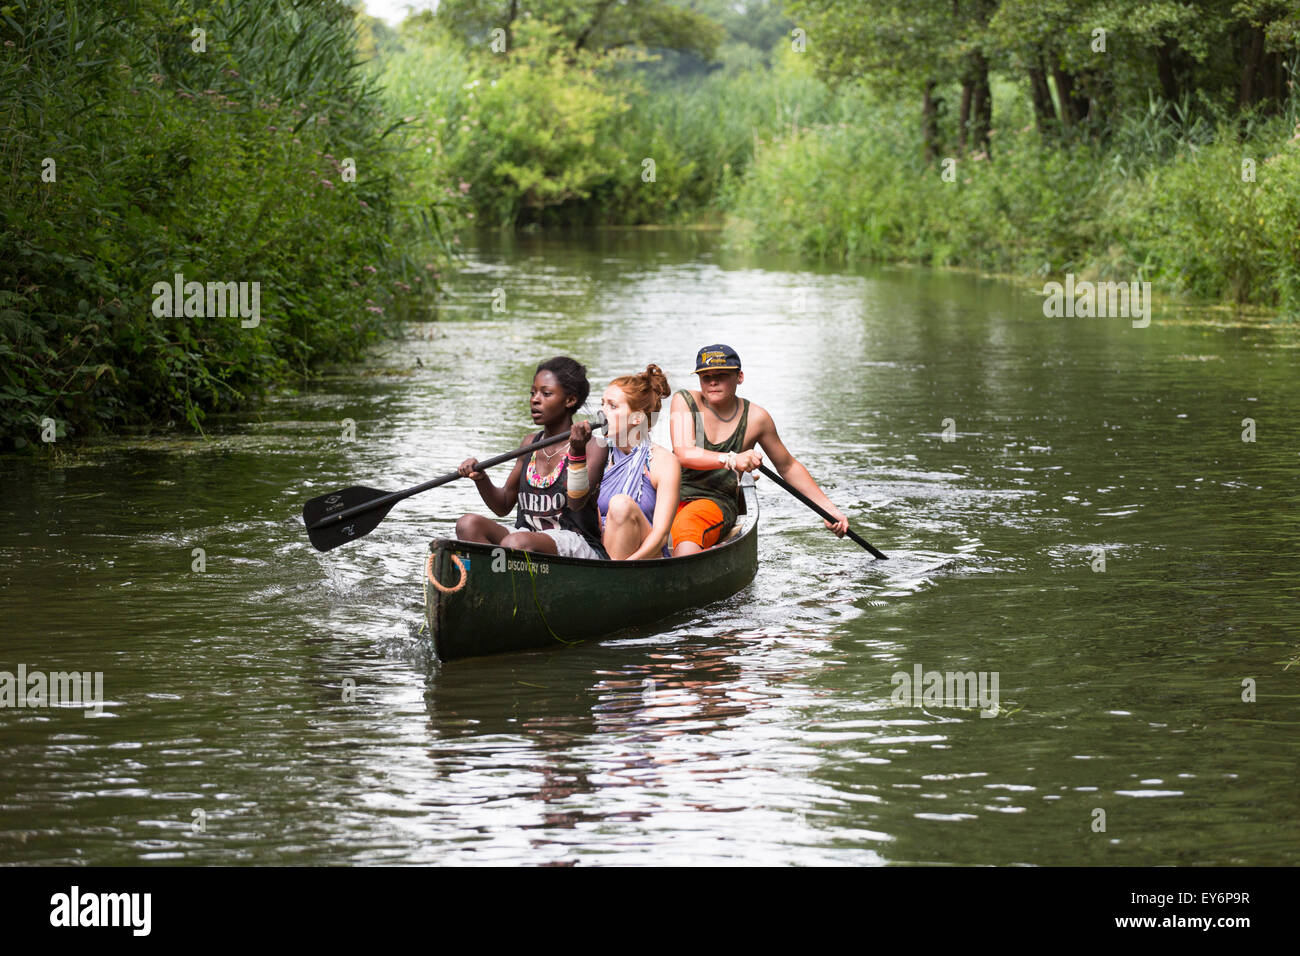 Canoeing tourists passing at river the 'Dommel' in the Netherlands Stock Photo